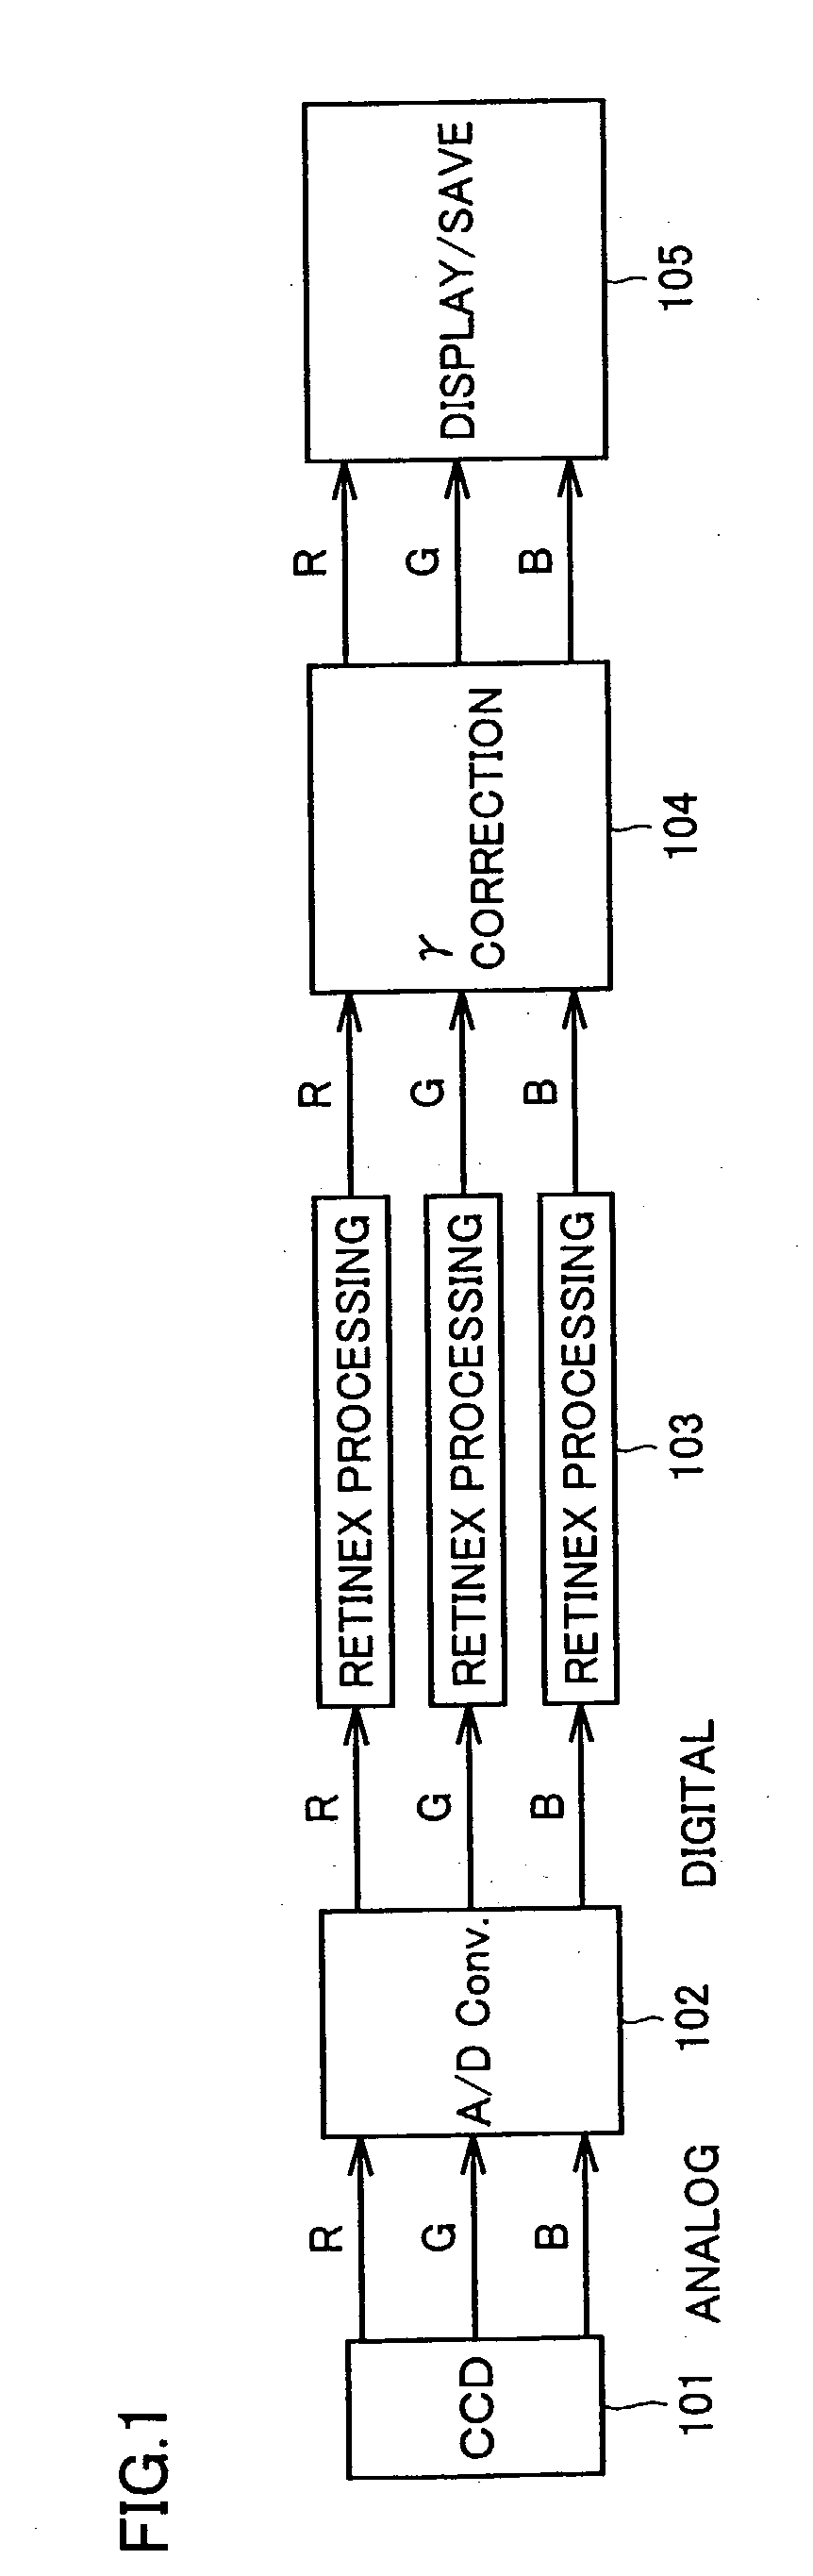 Image processing program product and device for executing retinex processing